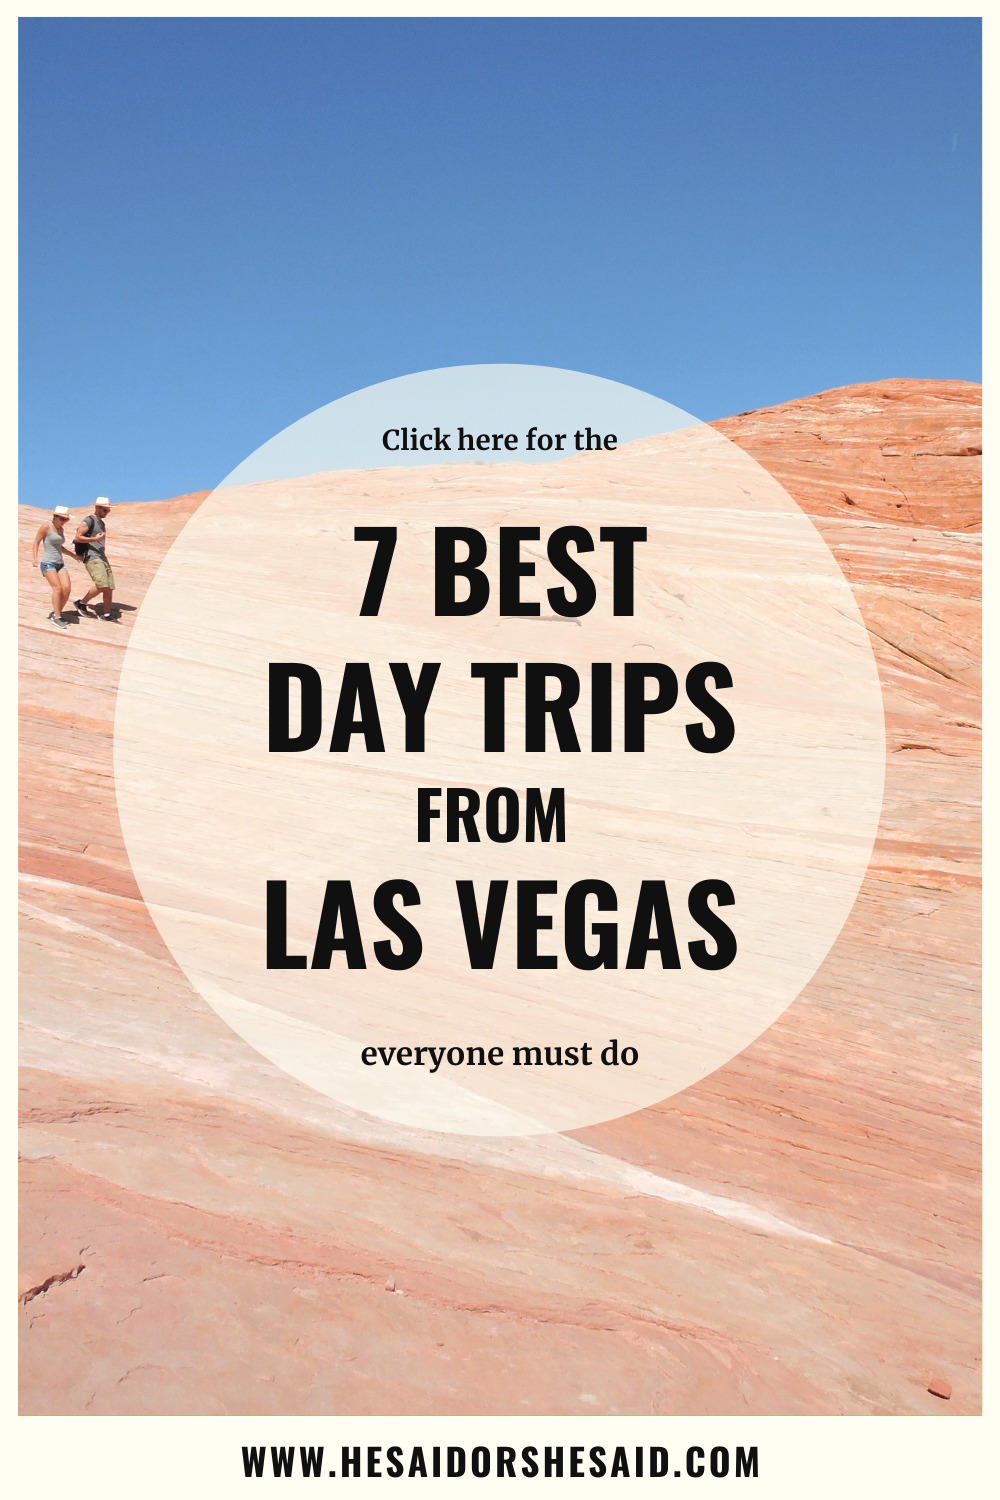 7 BEST day trips from Las Vegas everyone must do by hesaidorshesaid